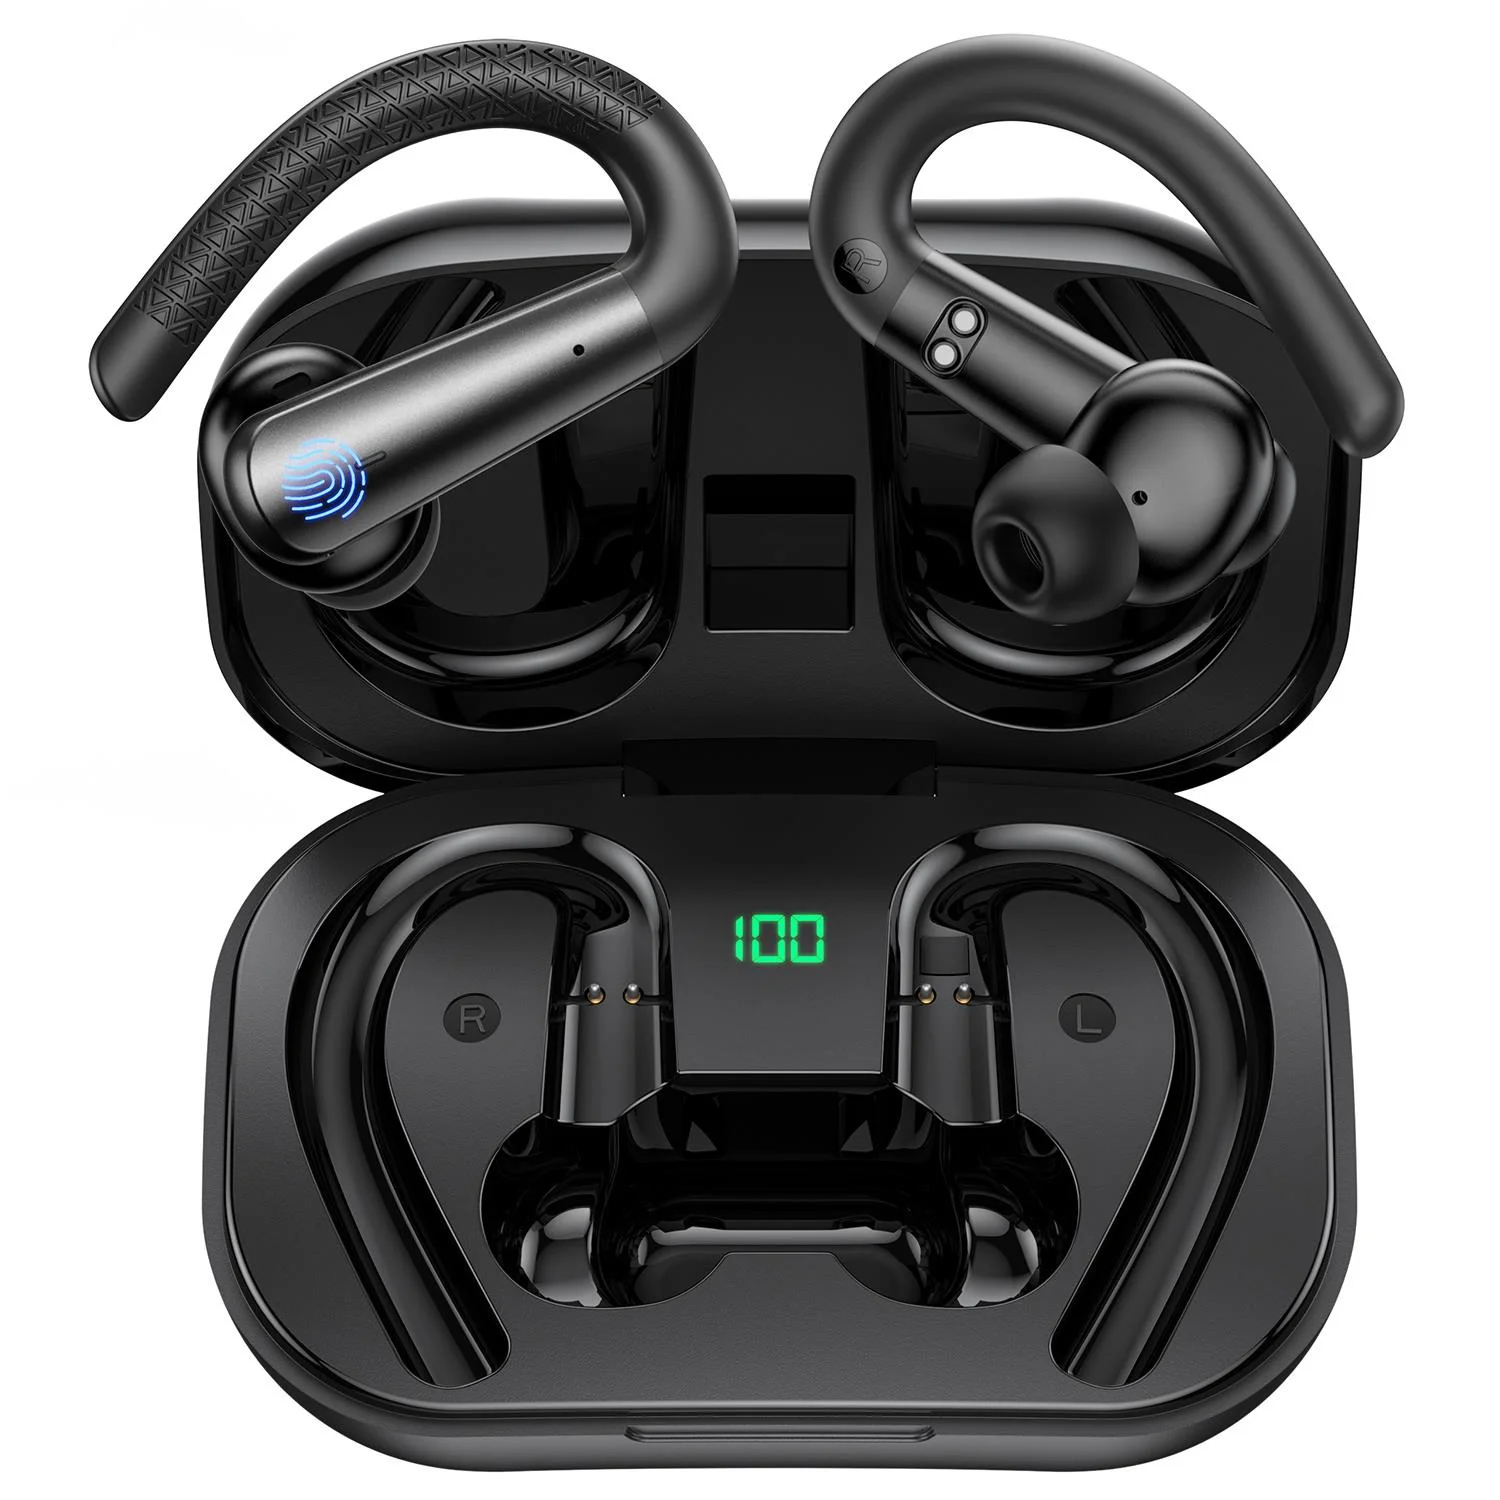 

X13 Wireless Earbuds Sport Bluetooth Headset 40Hrs Earphones with Mic IPX6 Waterproof Earpiece with LED Display for Men Gift